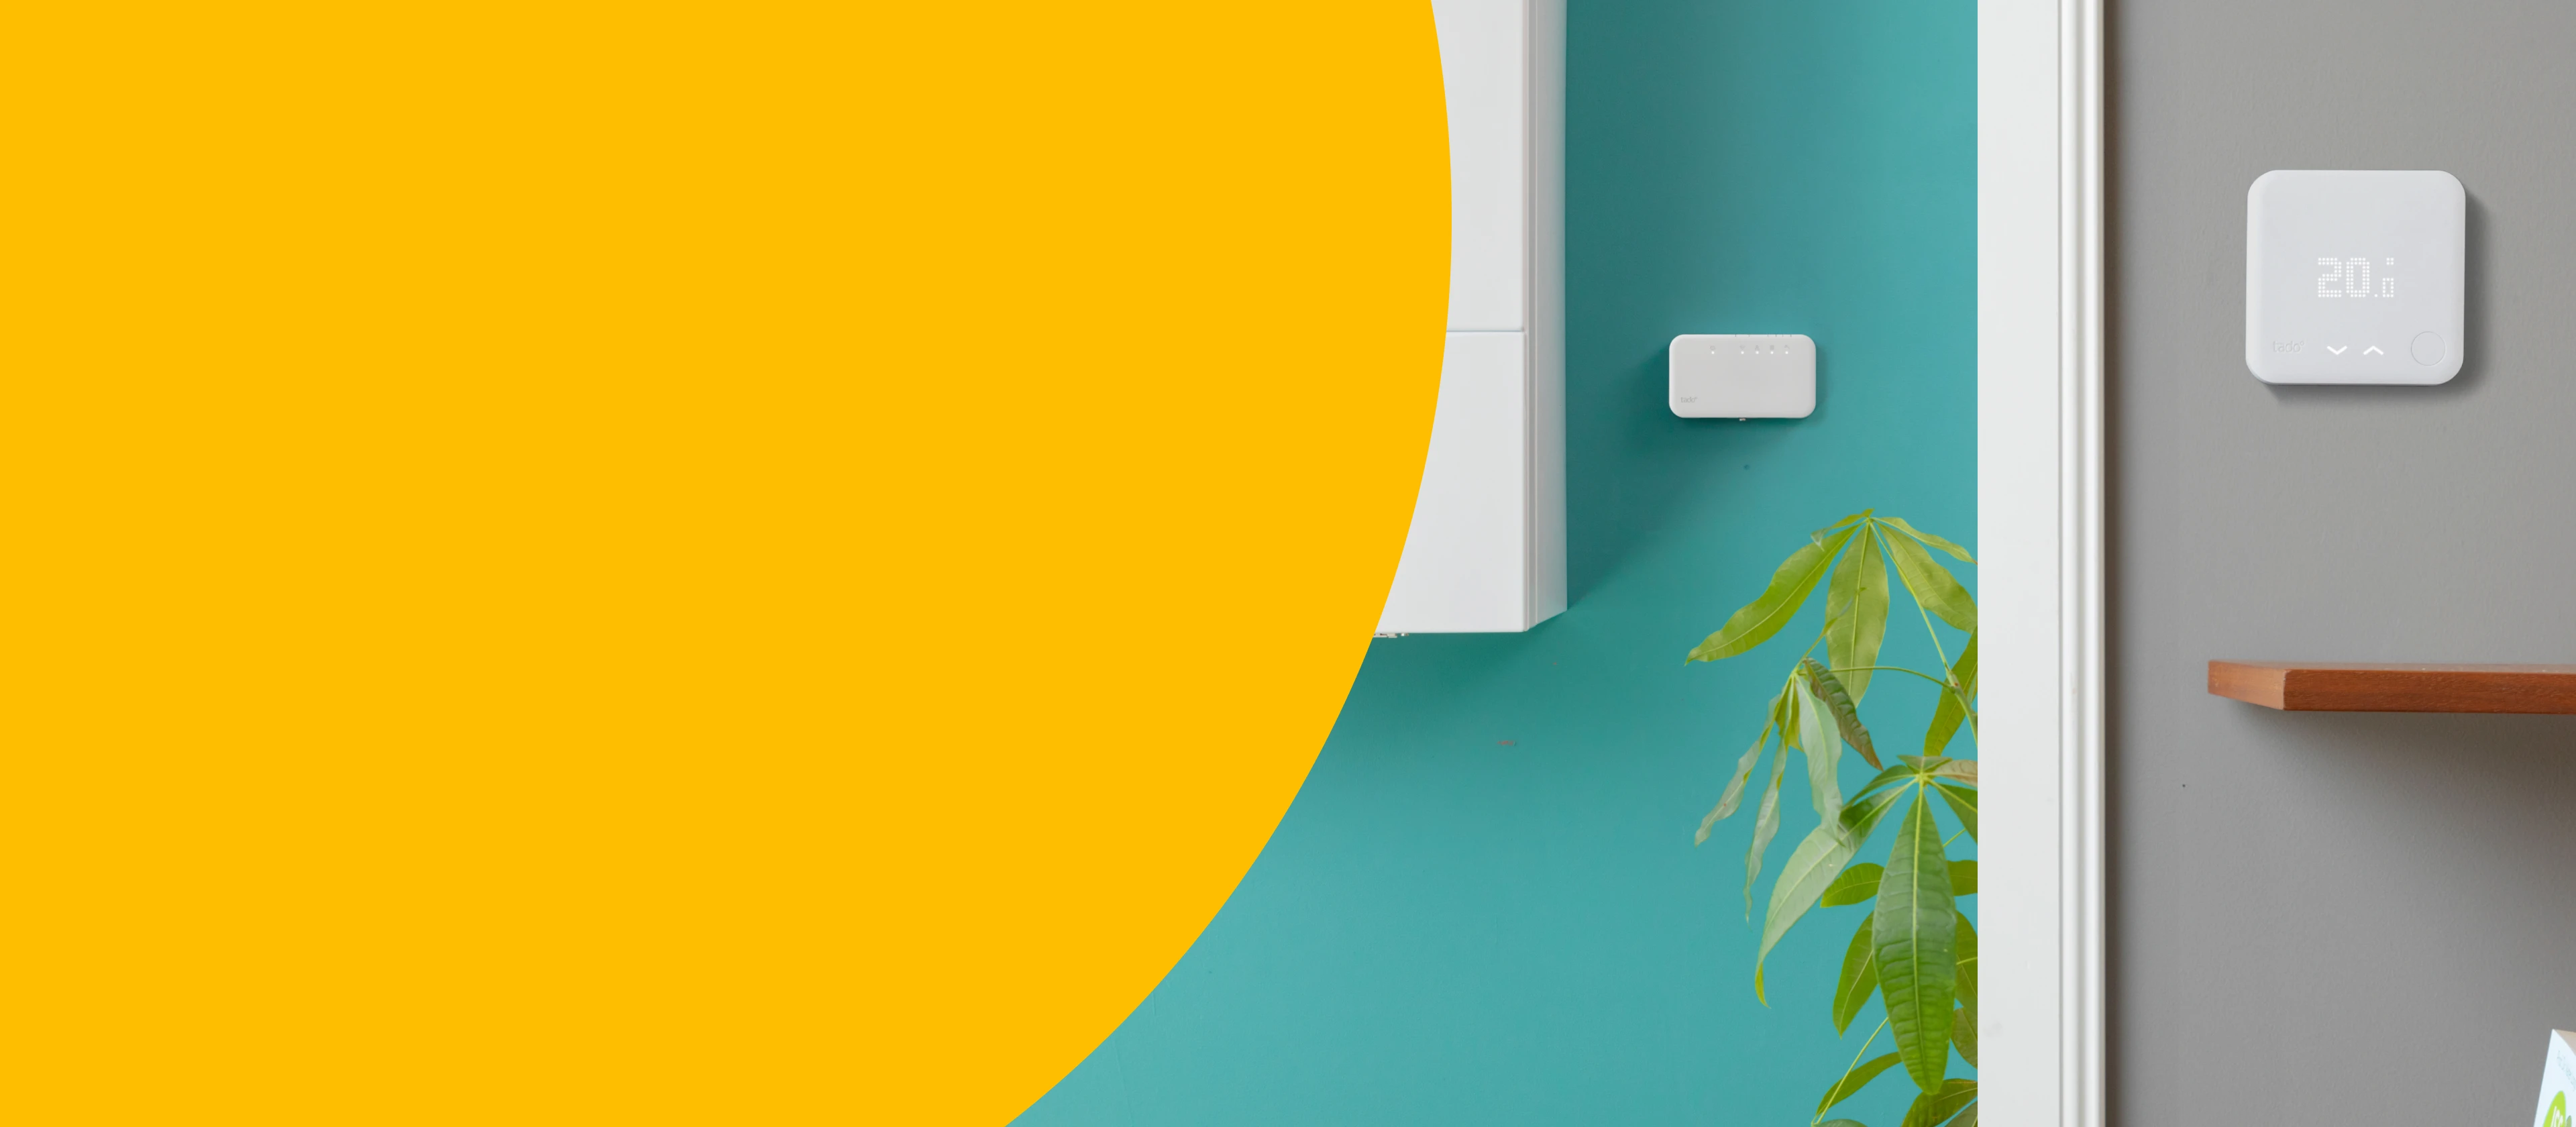 UK HomeKit: Tado offers a solid smart home thermostat ecosystem that works  with iPhone - 9to5Mac